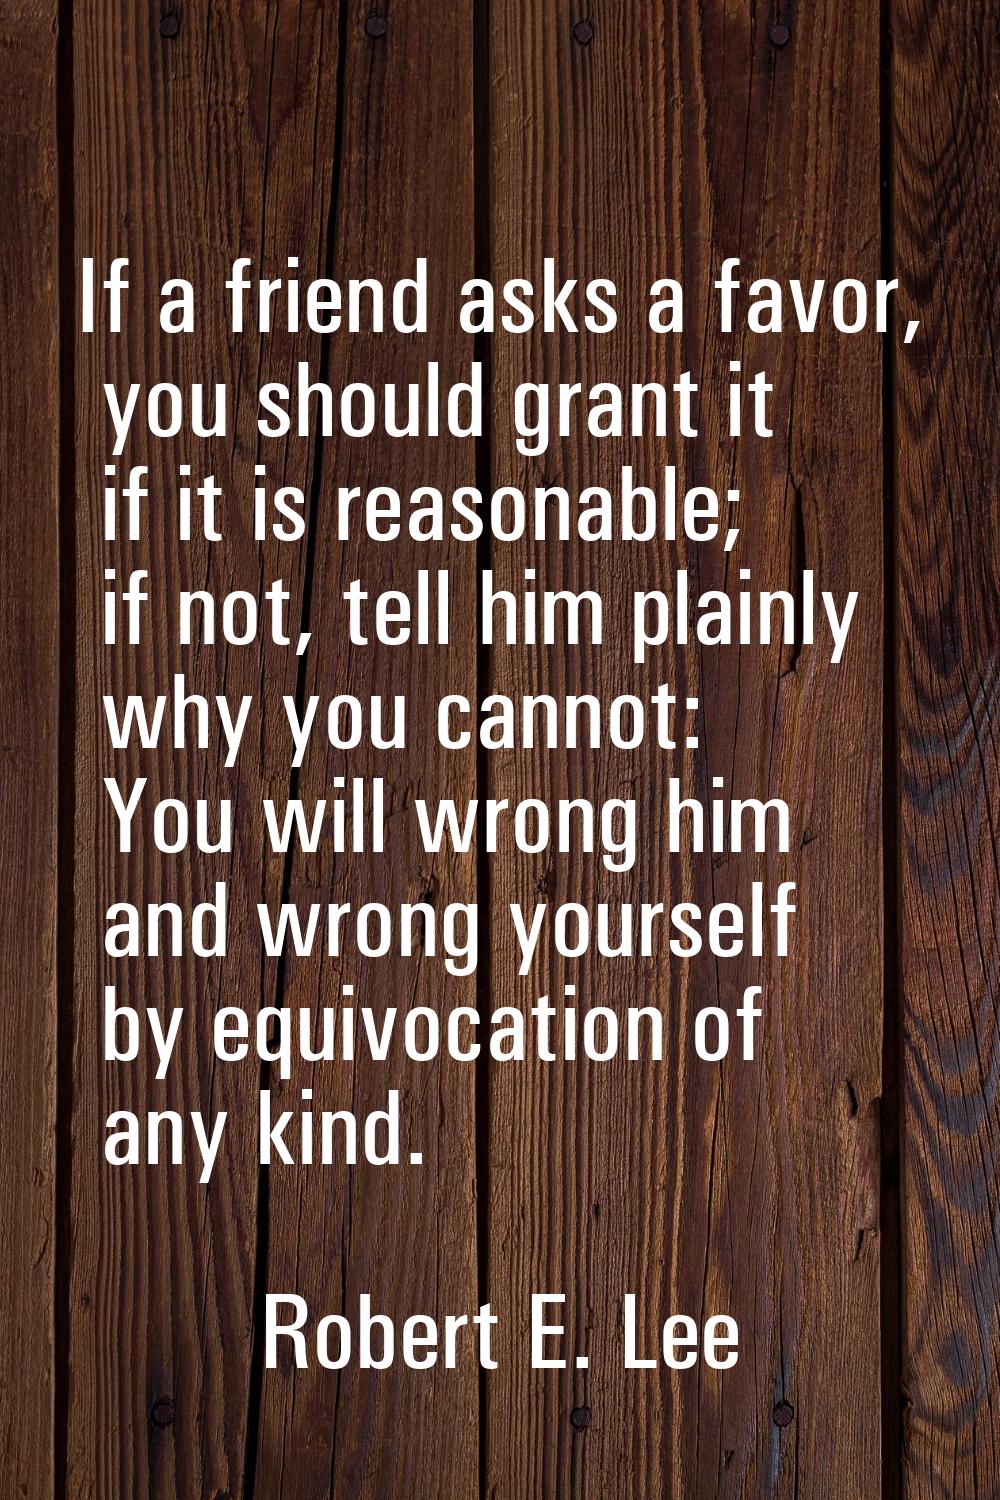 If a friend asks a favor, you should grant it if it is reasonable; if not, tell him plainly why you